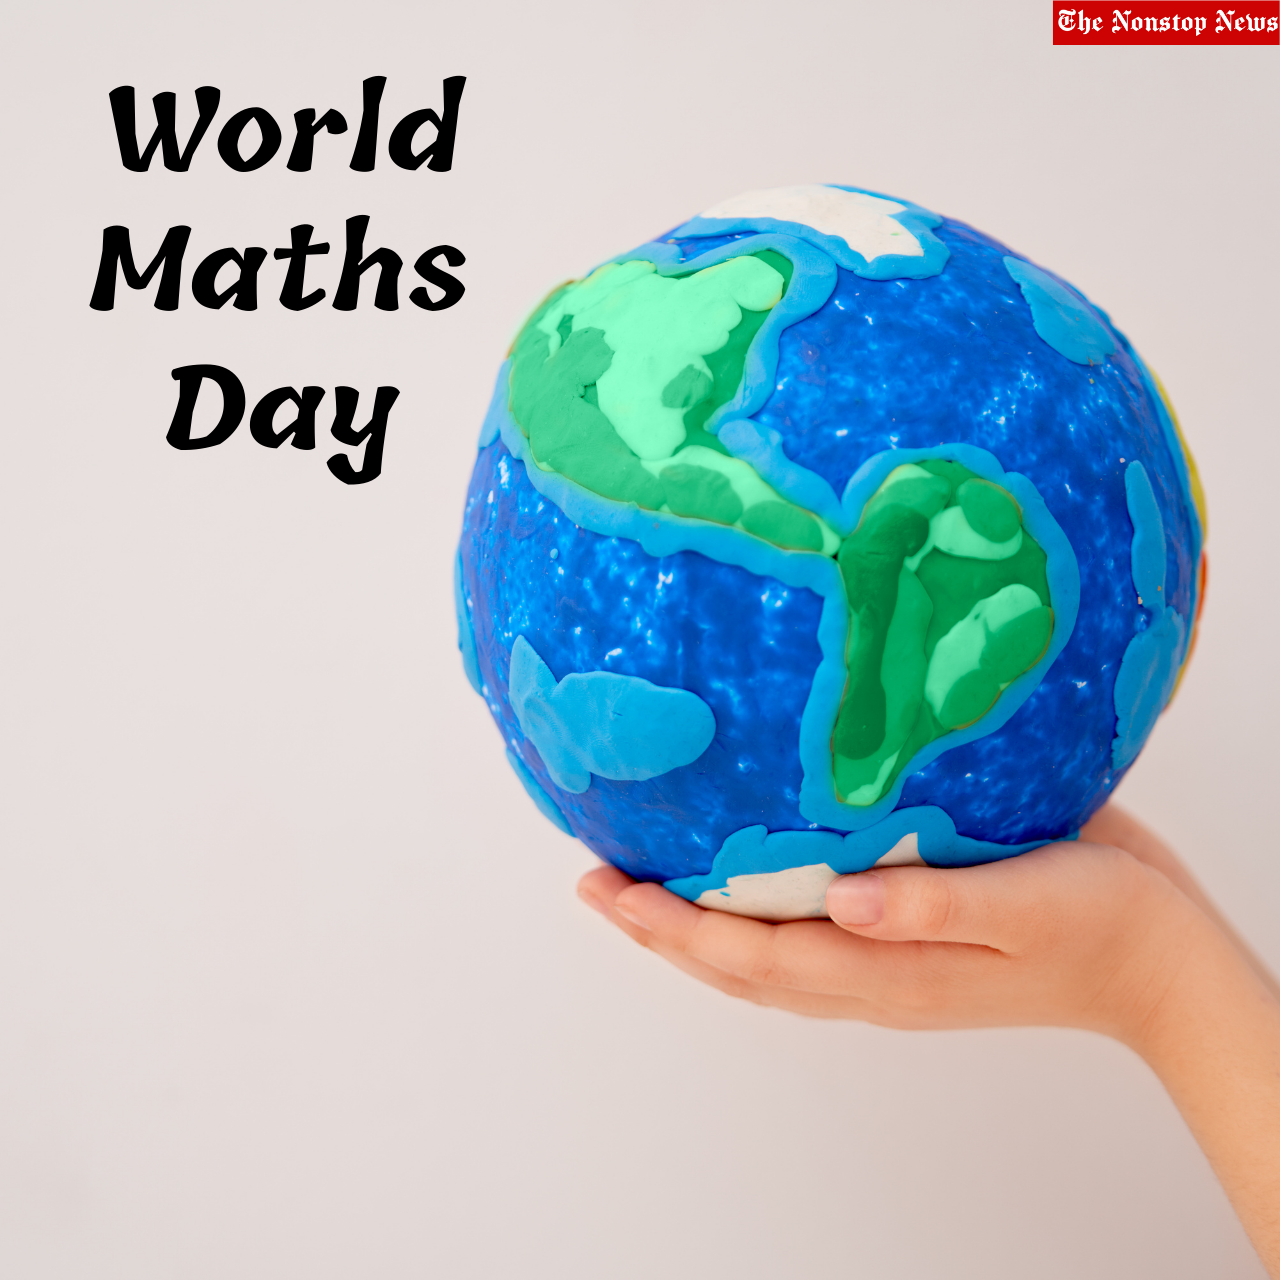 World Maths Day 2022 Quotes, Wishes, HD Images, Messages, Greetings to Share